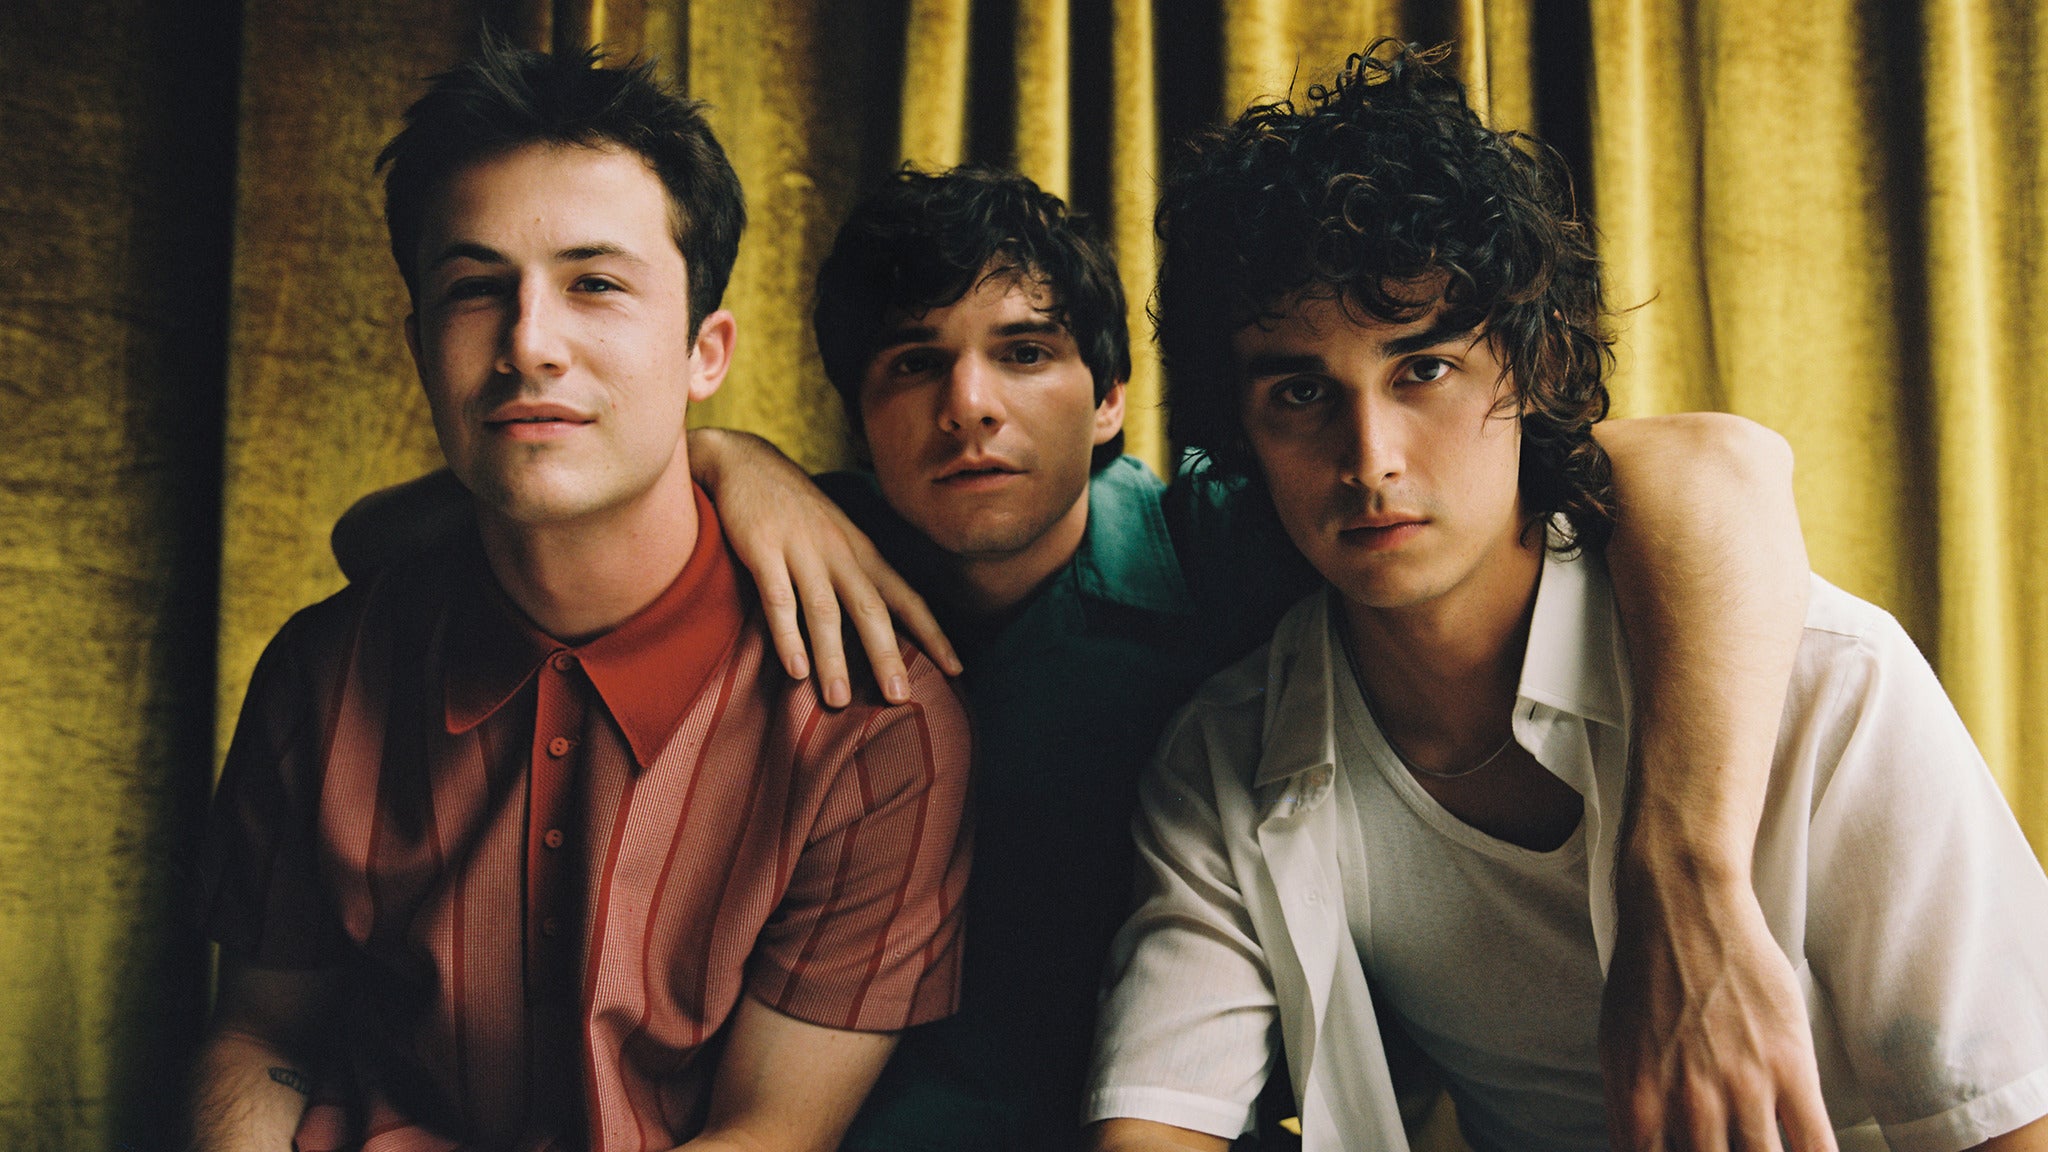 Image used with permission from Ticketmaster | Wallows - Tell Me That Its Over Tour tickets